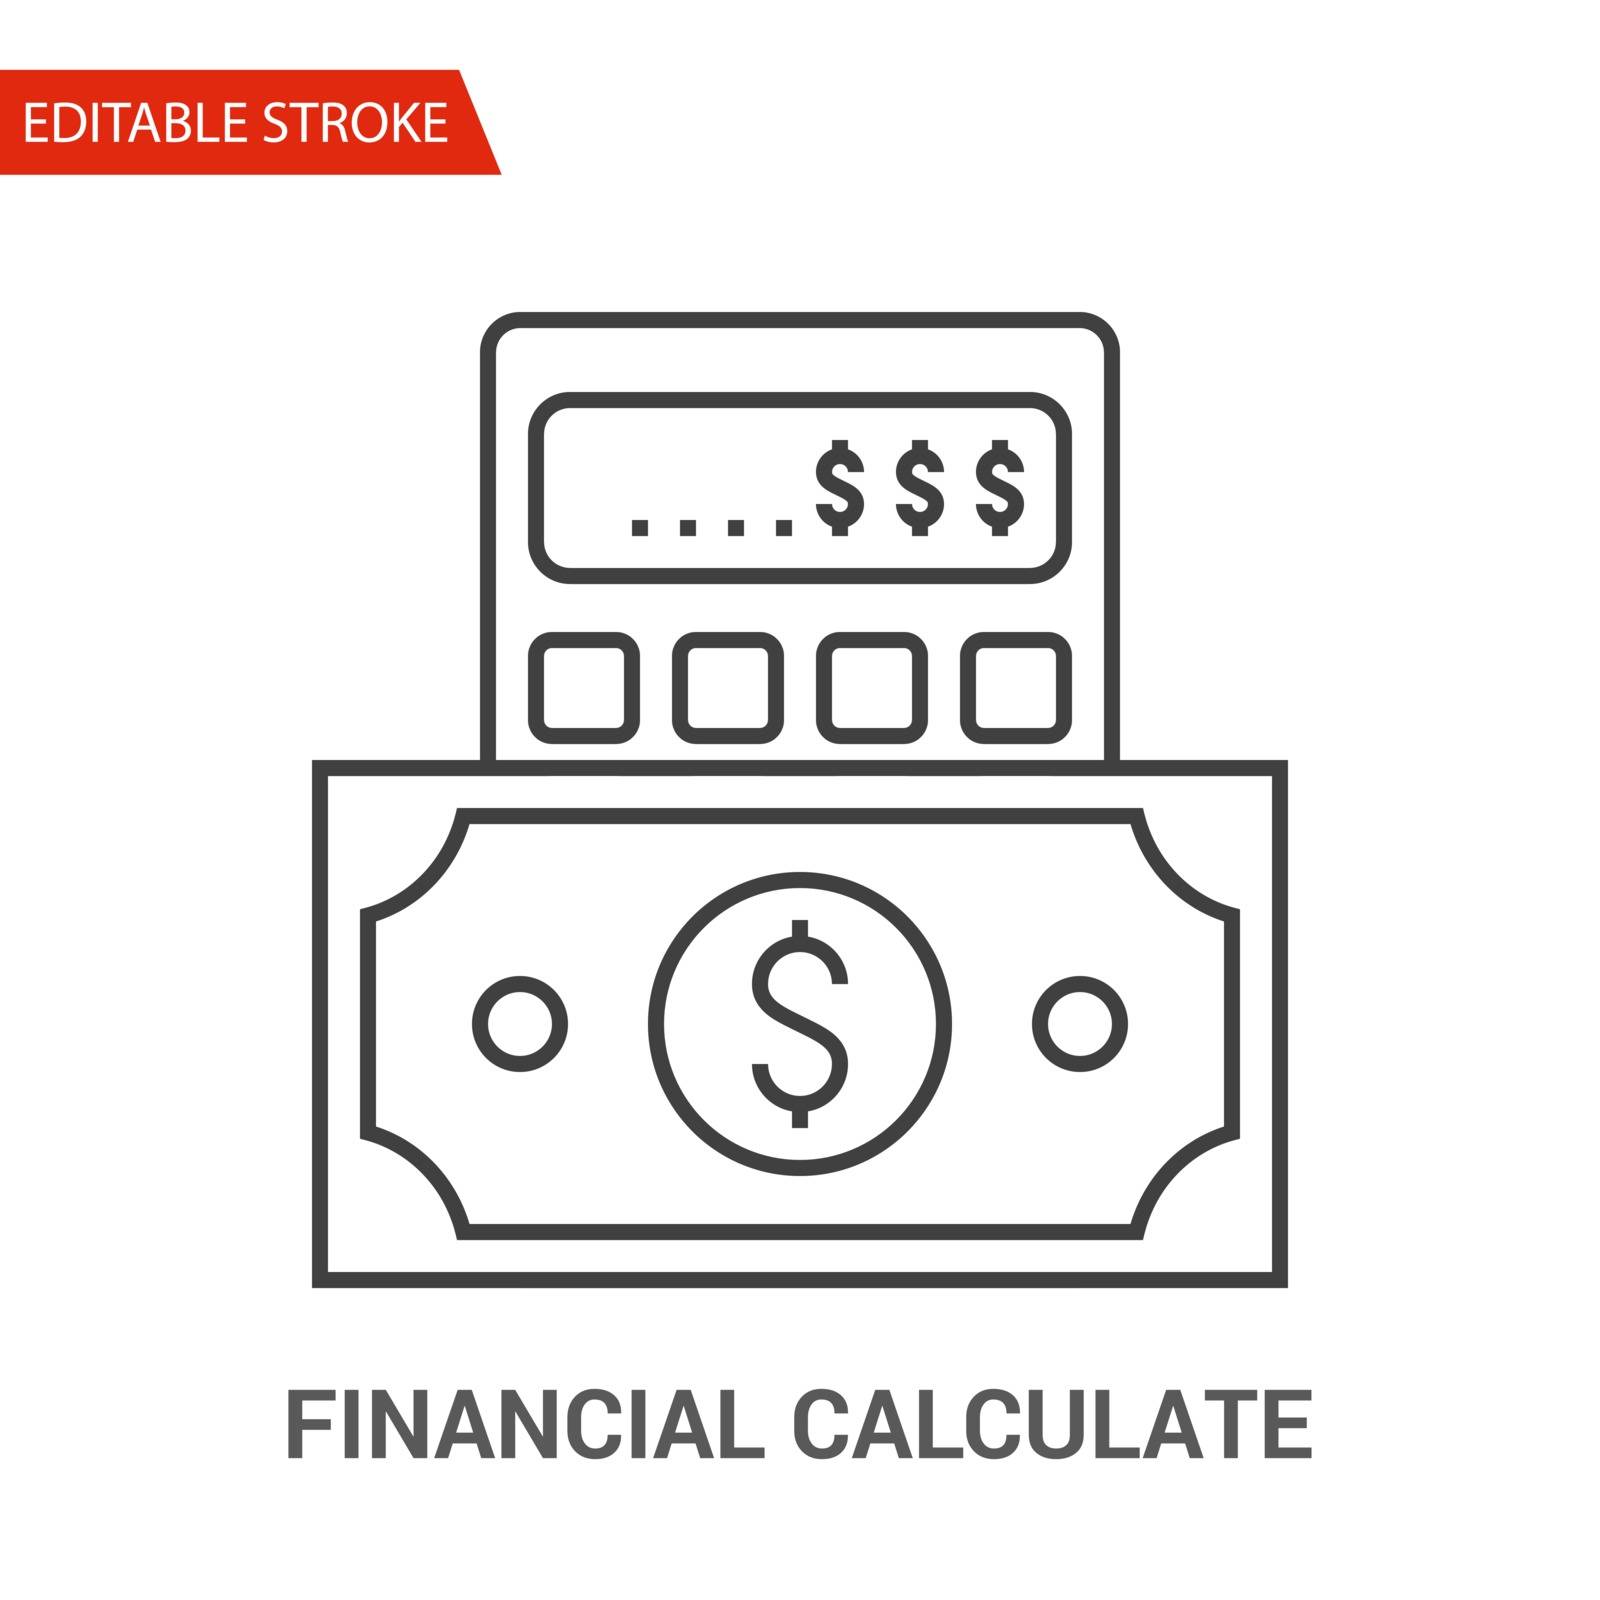 Financial Calculate Icon. Thin Line Vector Illustration. Adjust stroke weight - Expand to any Size - Easy Change Colour - Editable Stroke - Pixel Perfect